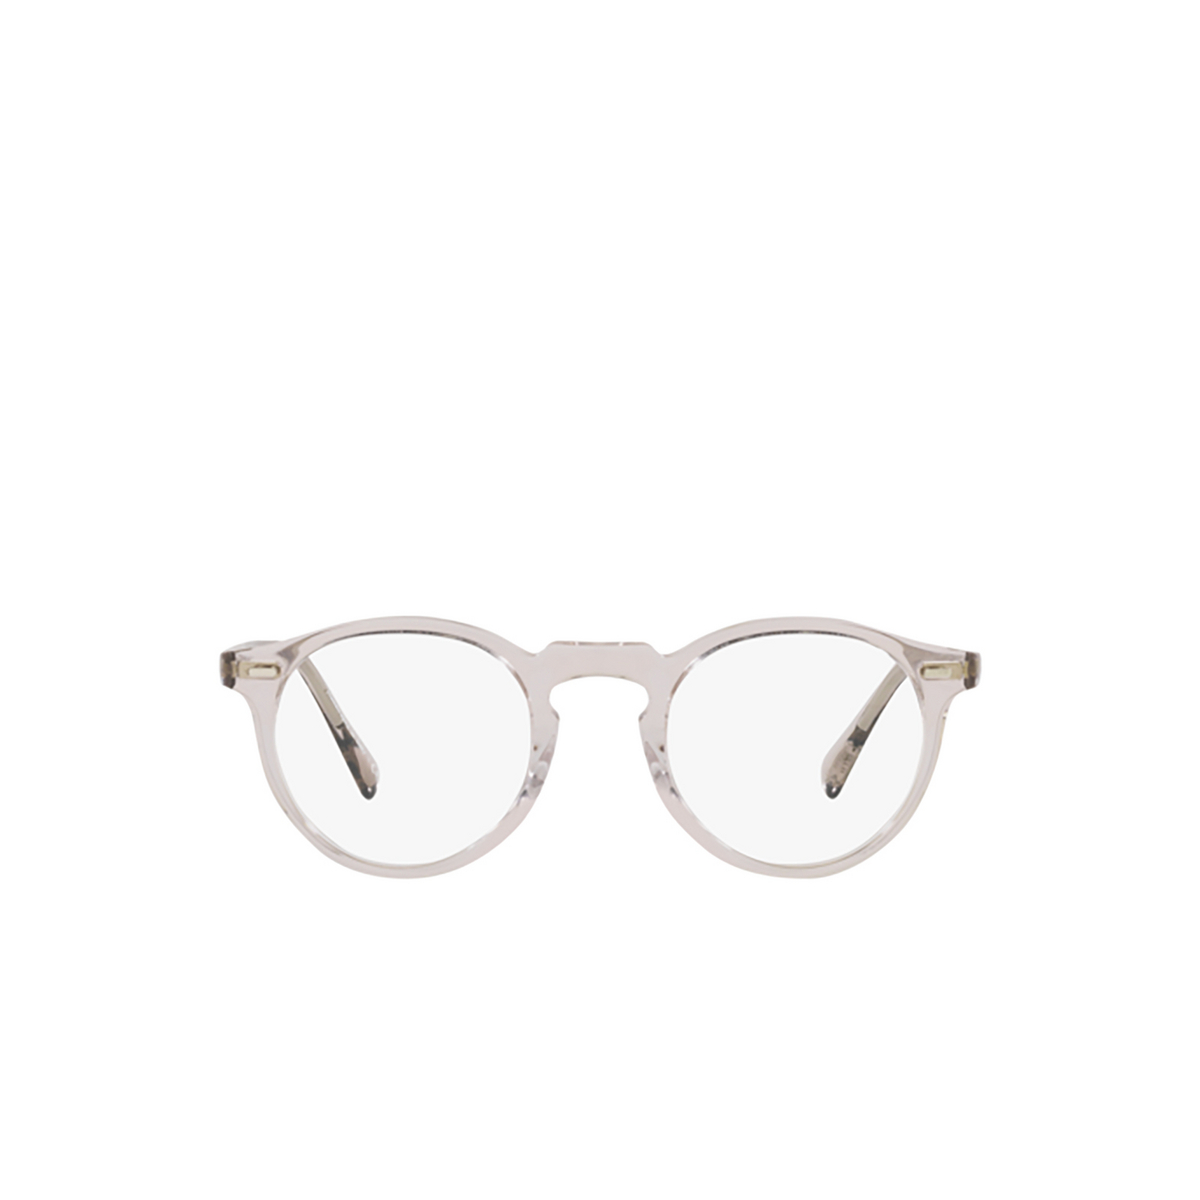 Oliver Peoples GREGORY PECK Eyeglasses 1467 Dune - front view